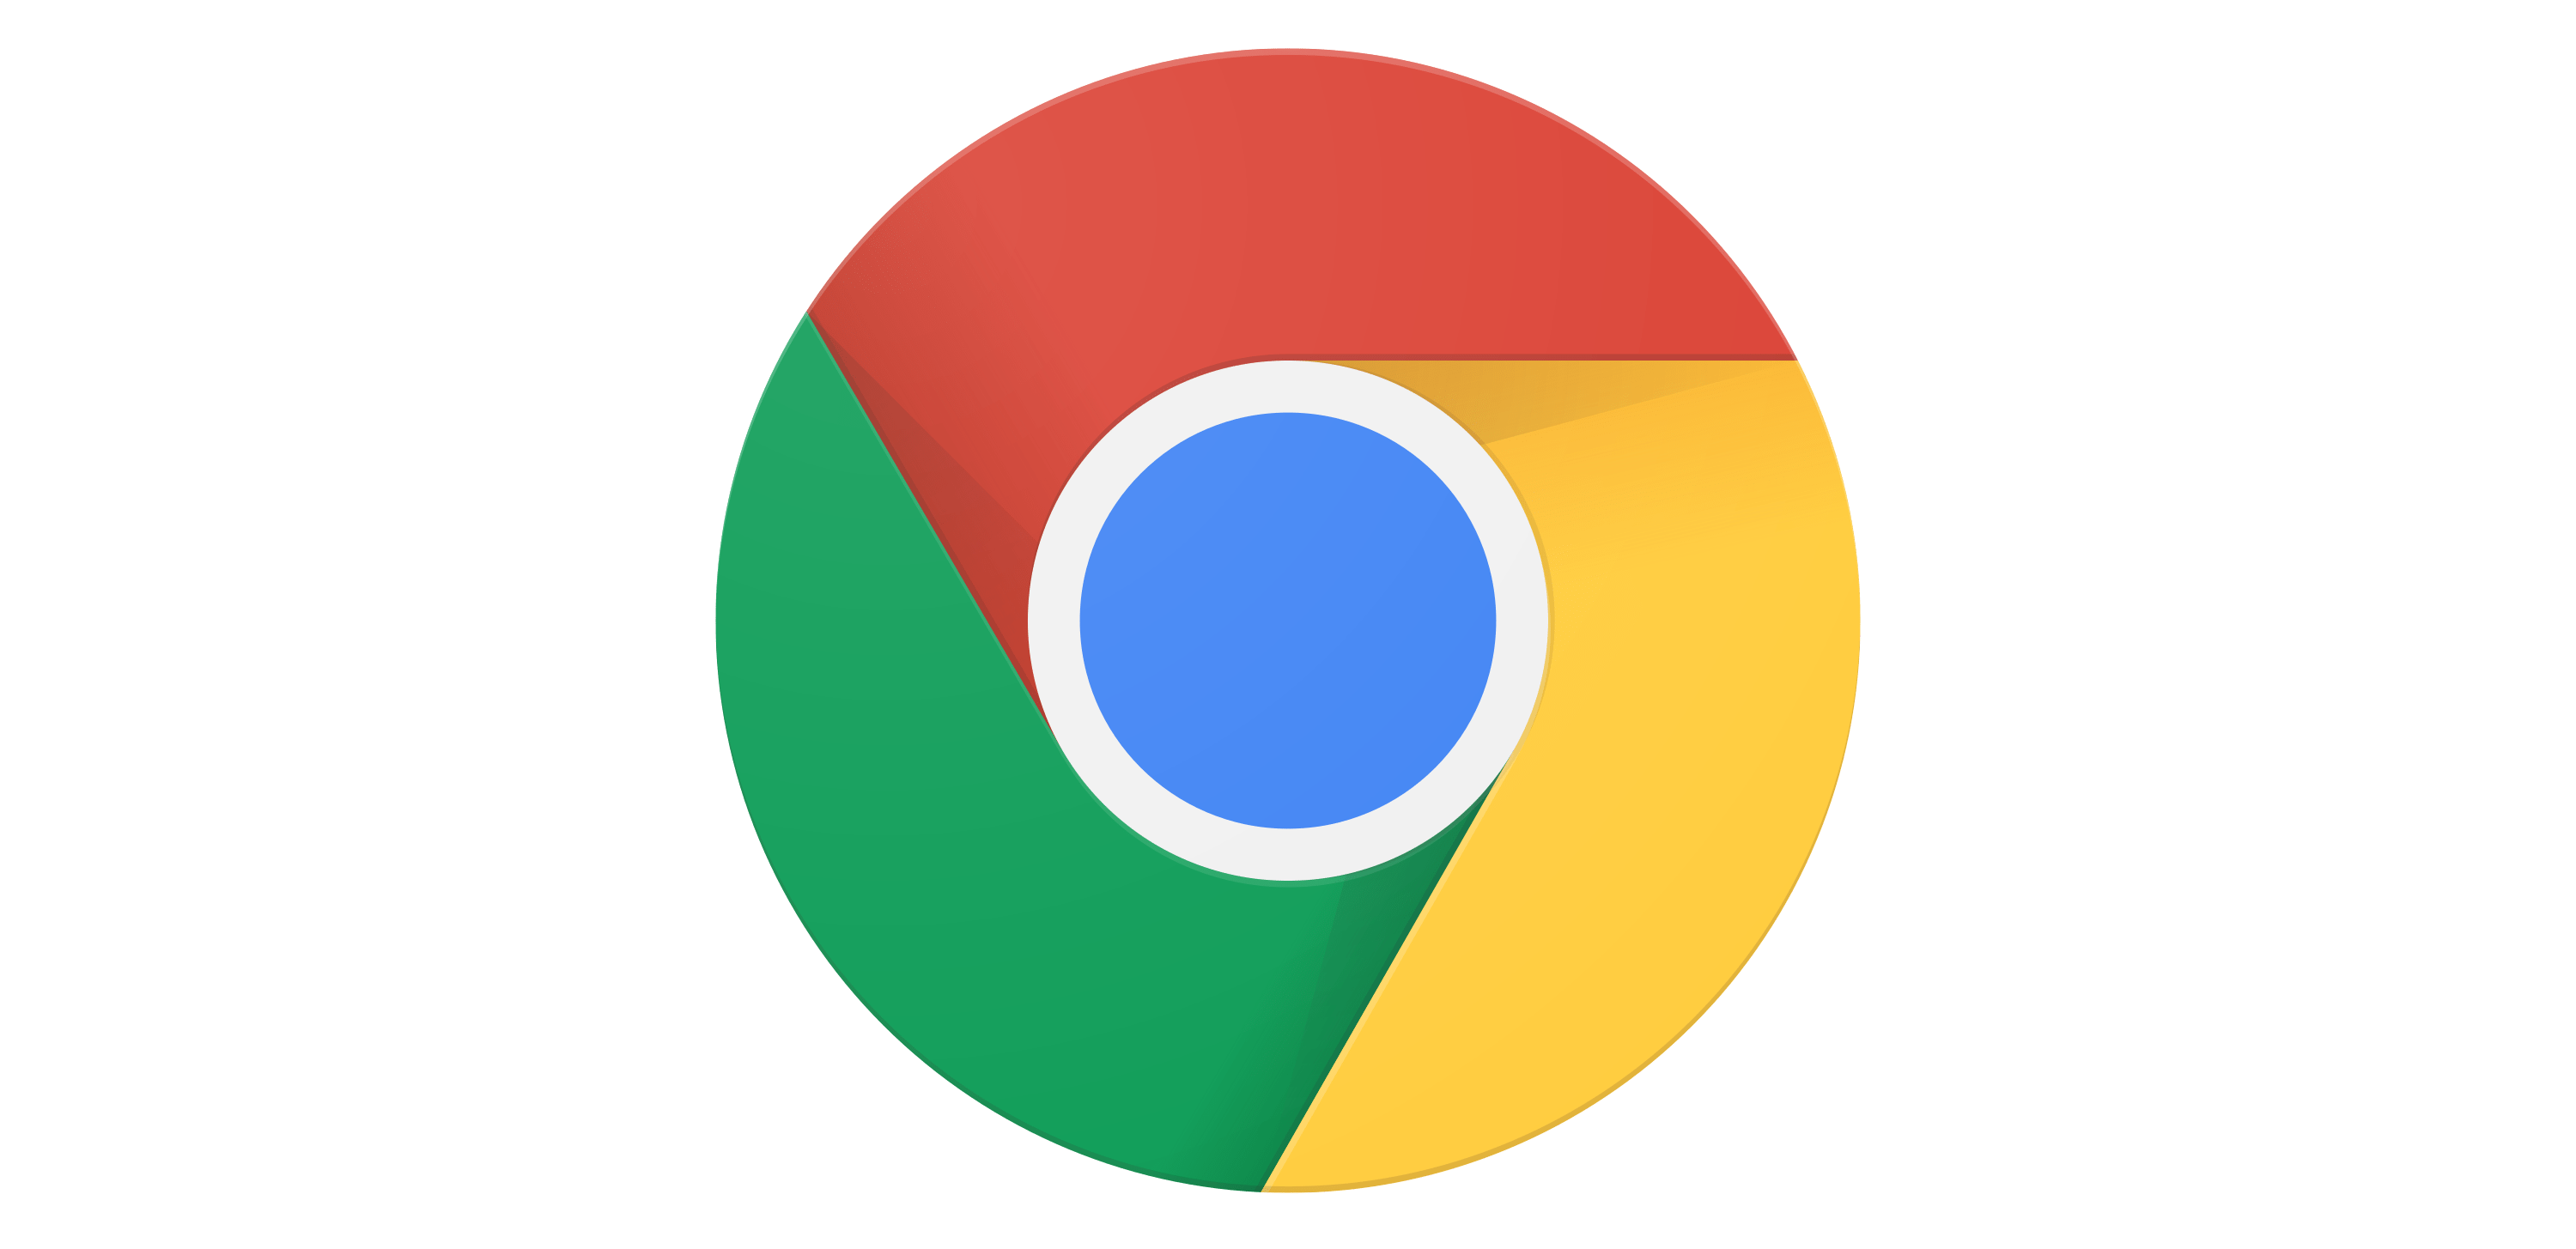 How to clear browser history on Google Chrome